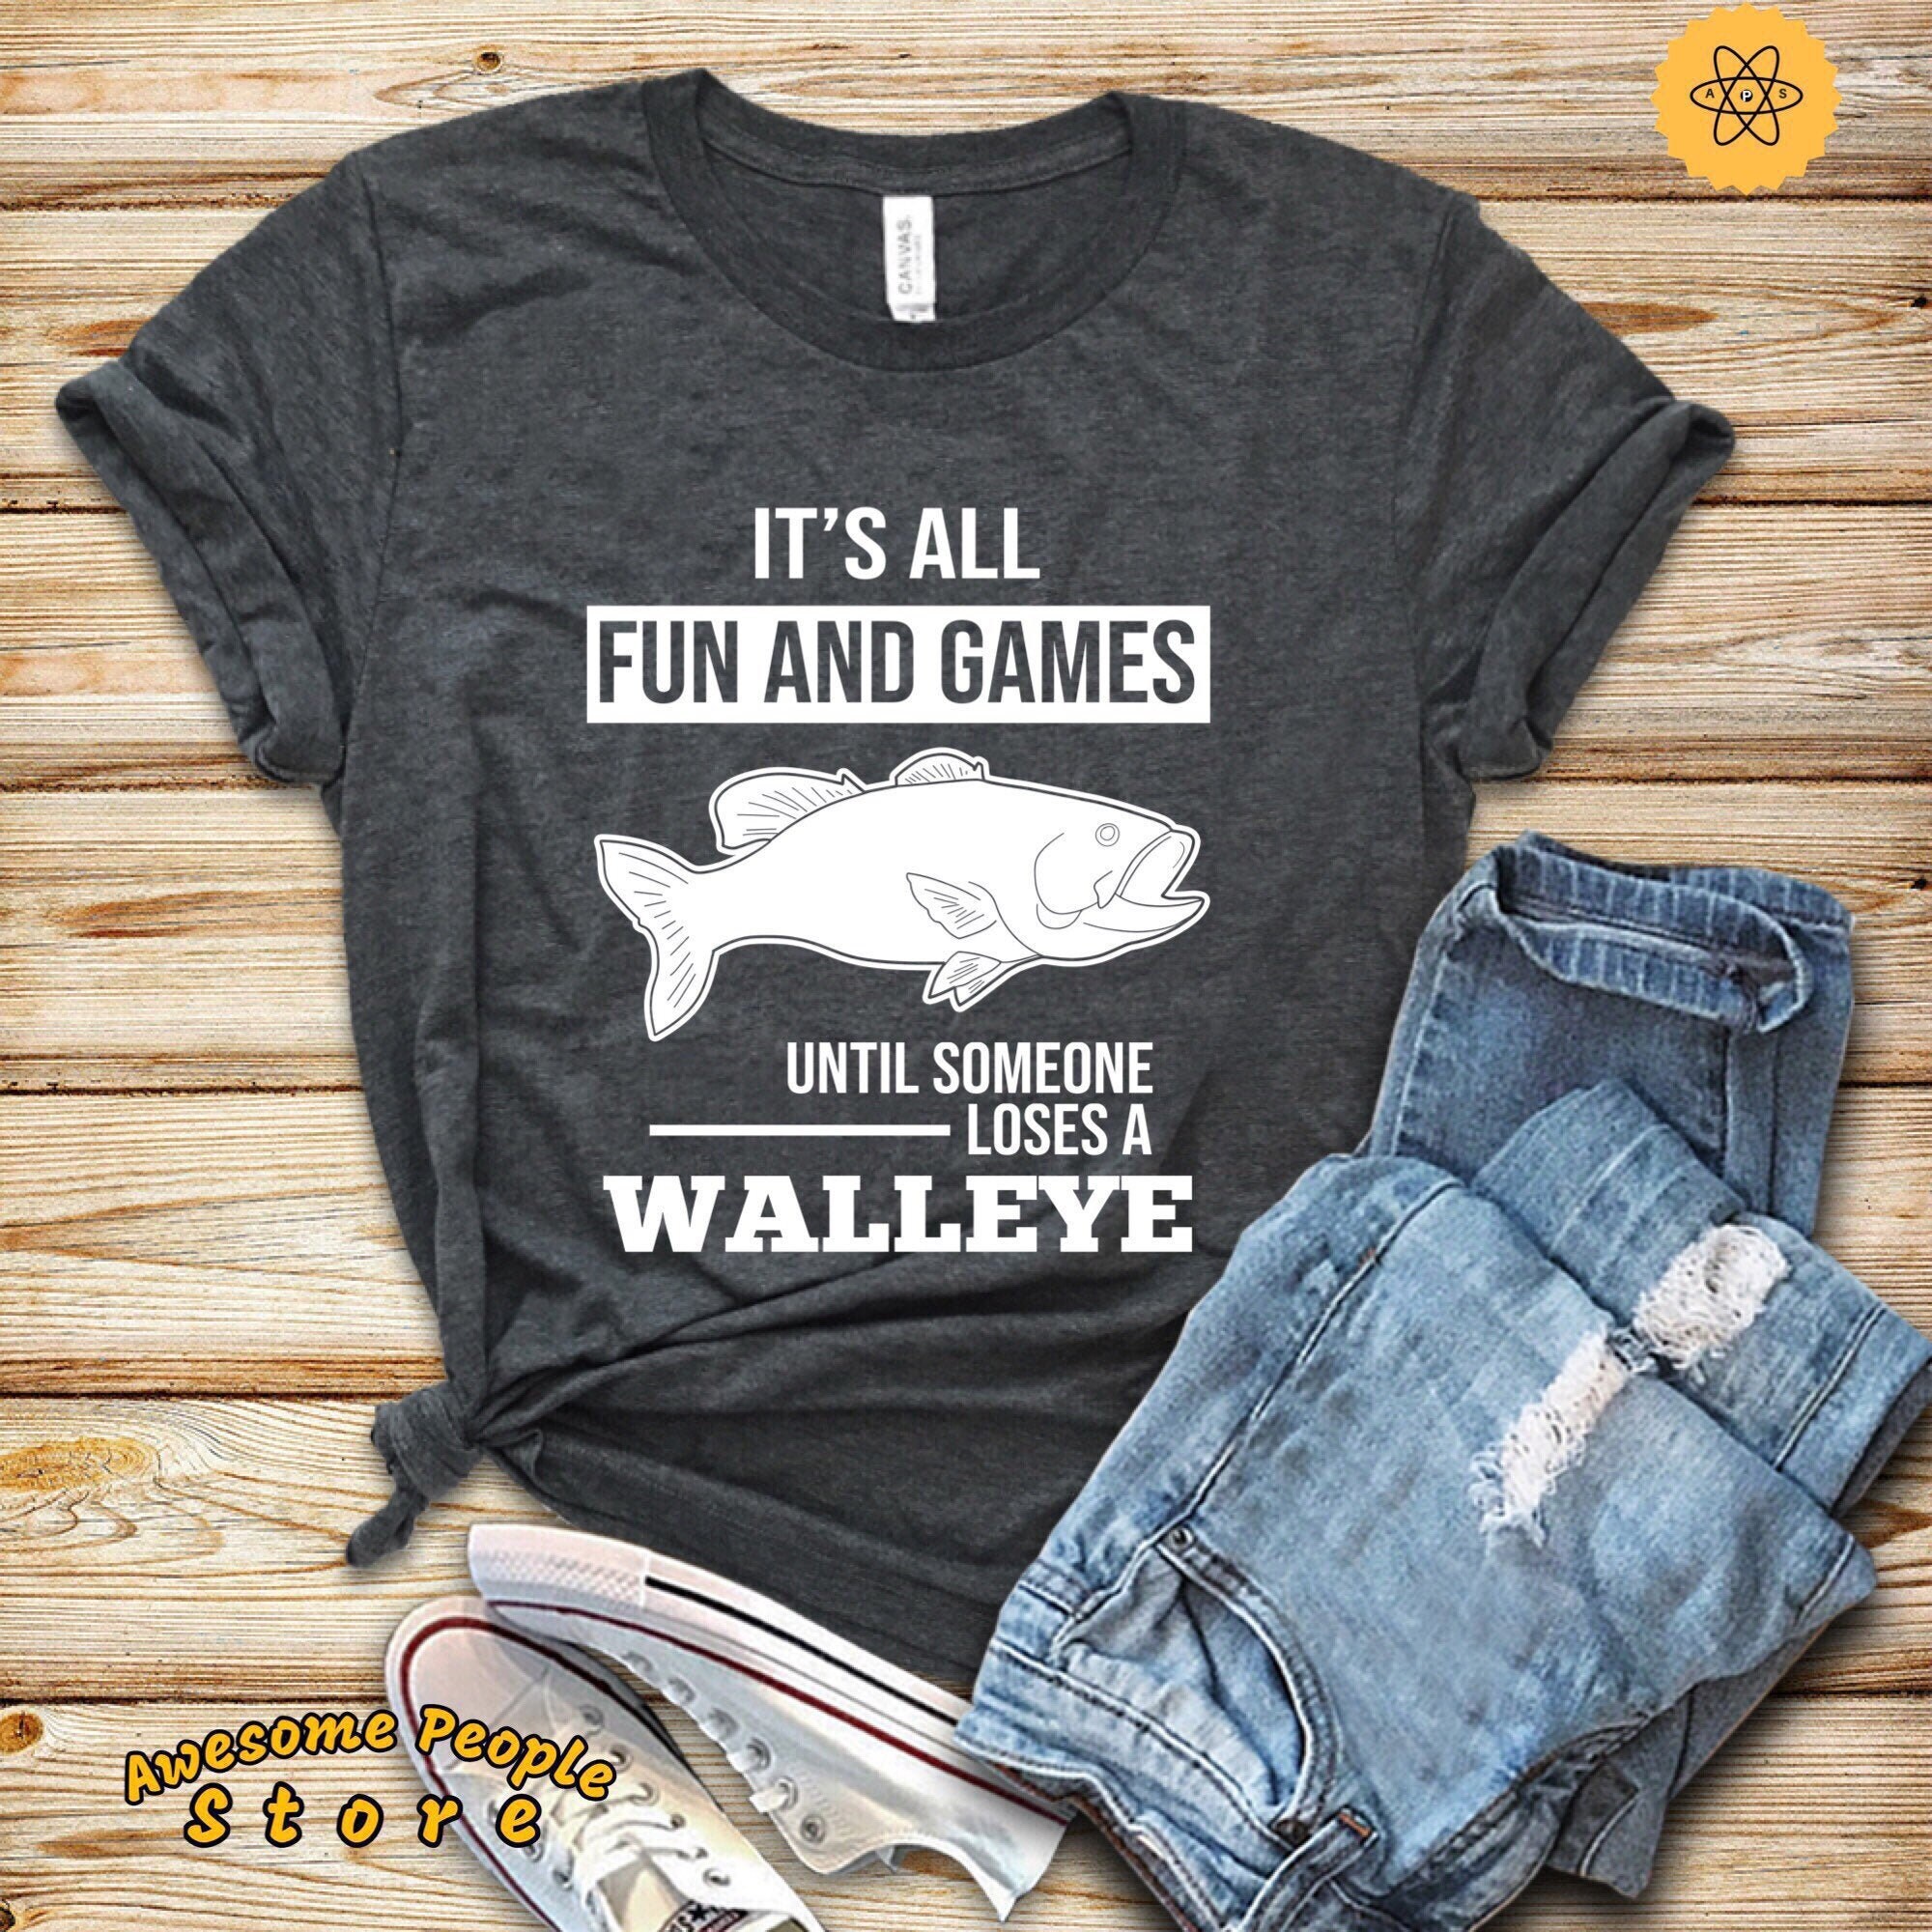 Walleye T-Shirt / Walleye Gift / Fishing Shirt / Fathers Day Fishing / It's All Fun and Games Until Someone Loses A Walleye Shirt